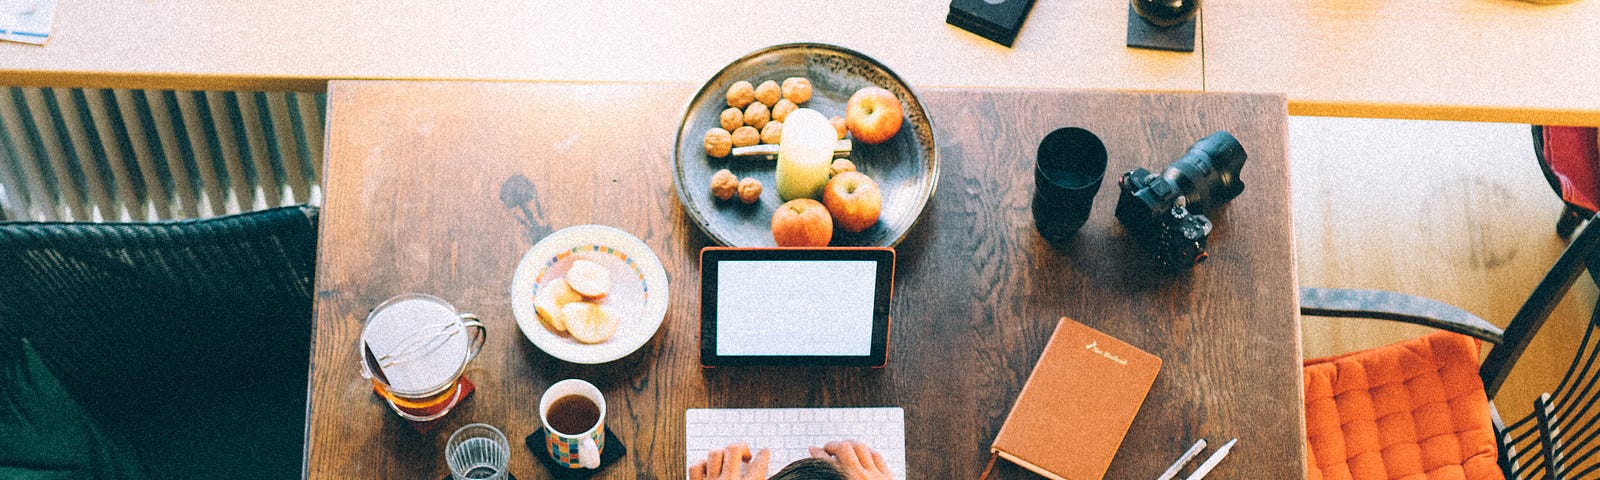 Man types on an iPad on his desk while surrounded by food.